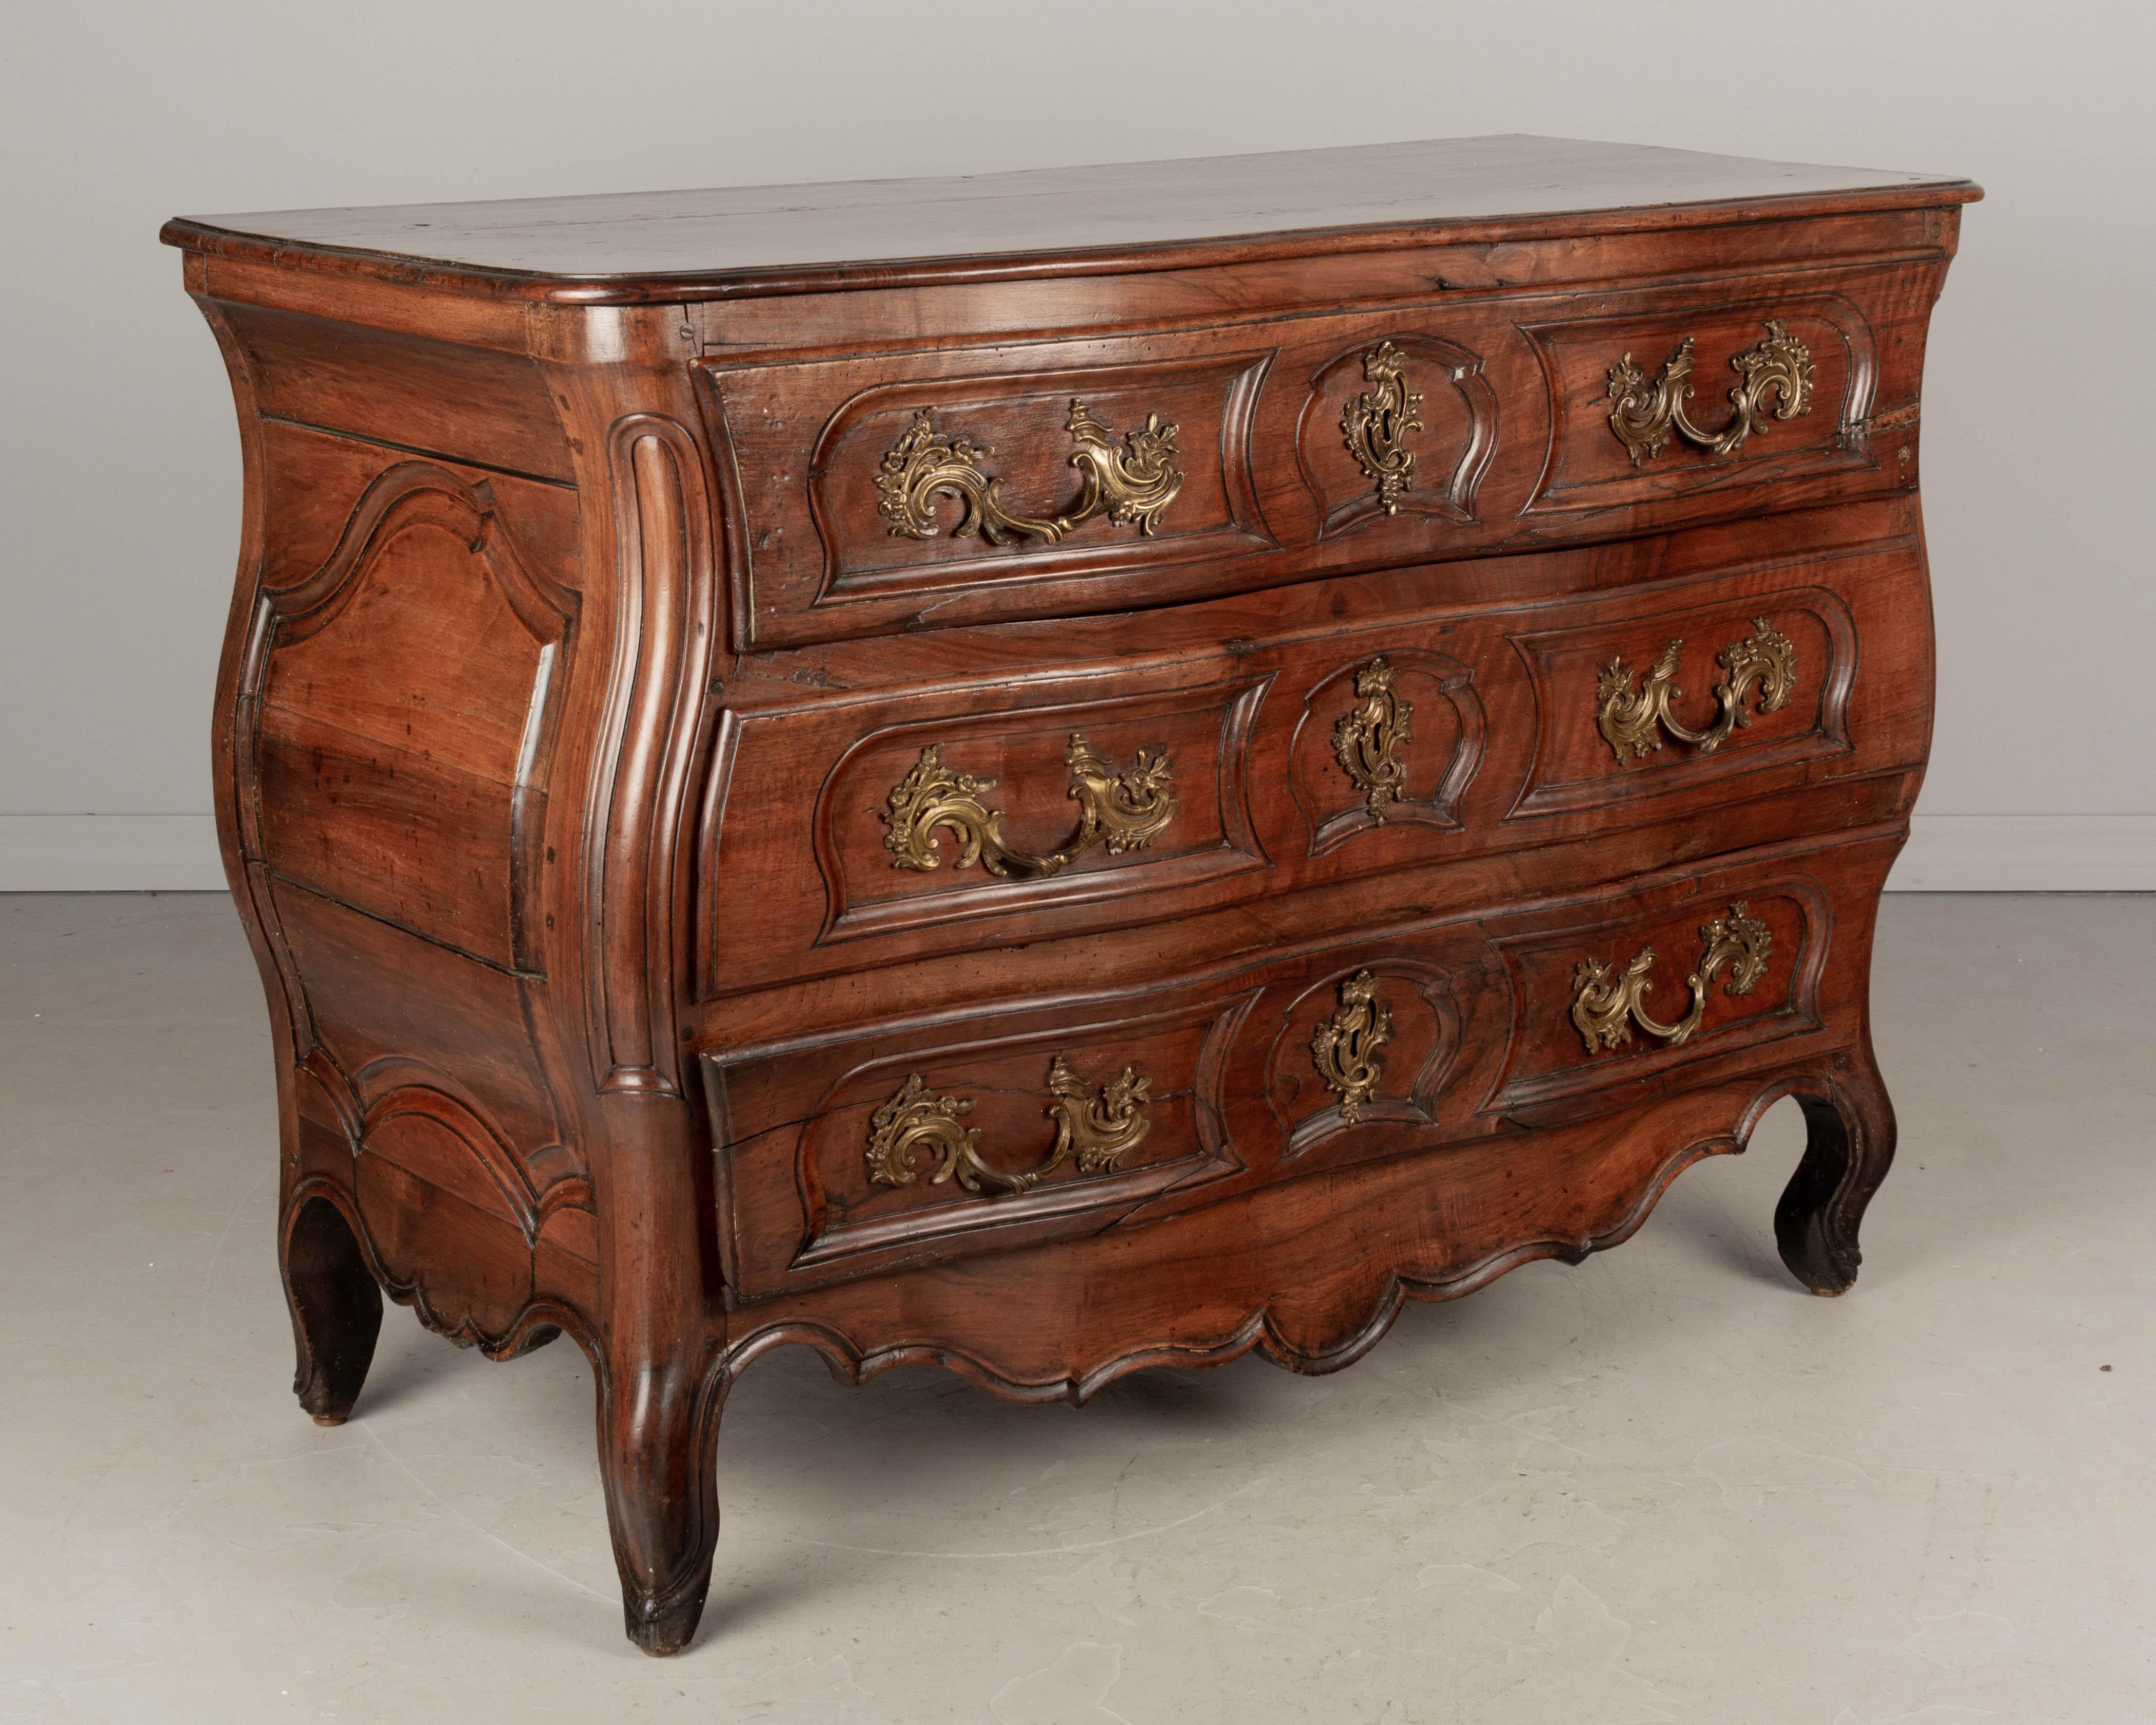 An 18th century French Louis XV commode, or chest of drawers, from the Bordeaux region made of solid walnut. Nice proportions with bold bombé form and serpentine front. Three dovetailed drawers with original cast bronze hardware (lower right handle